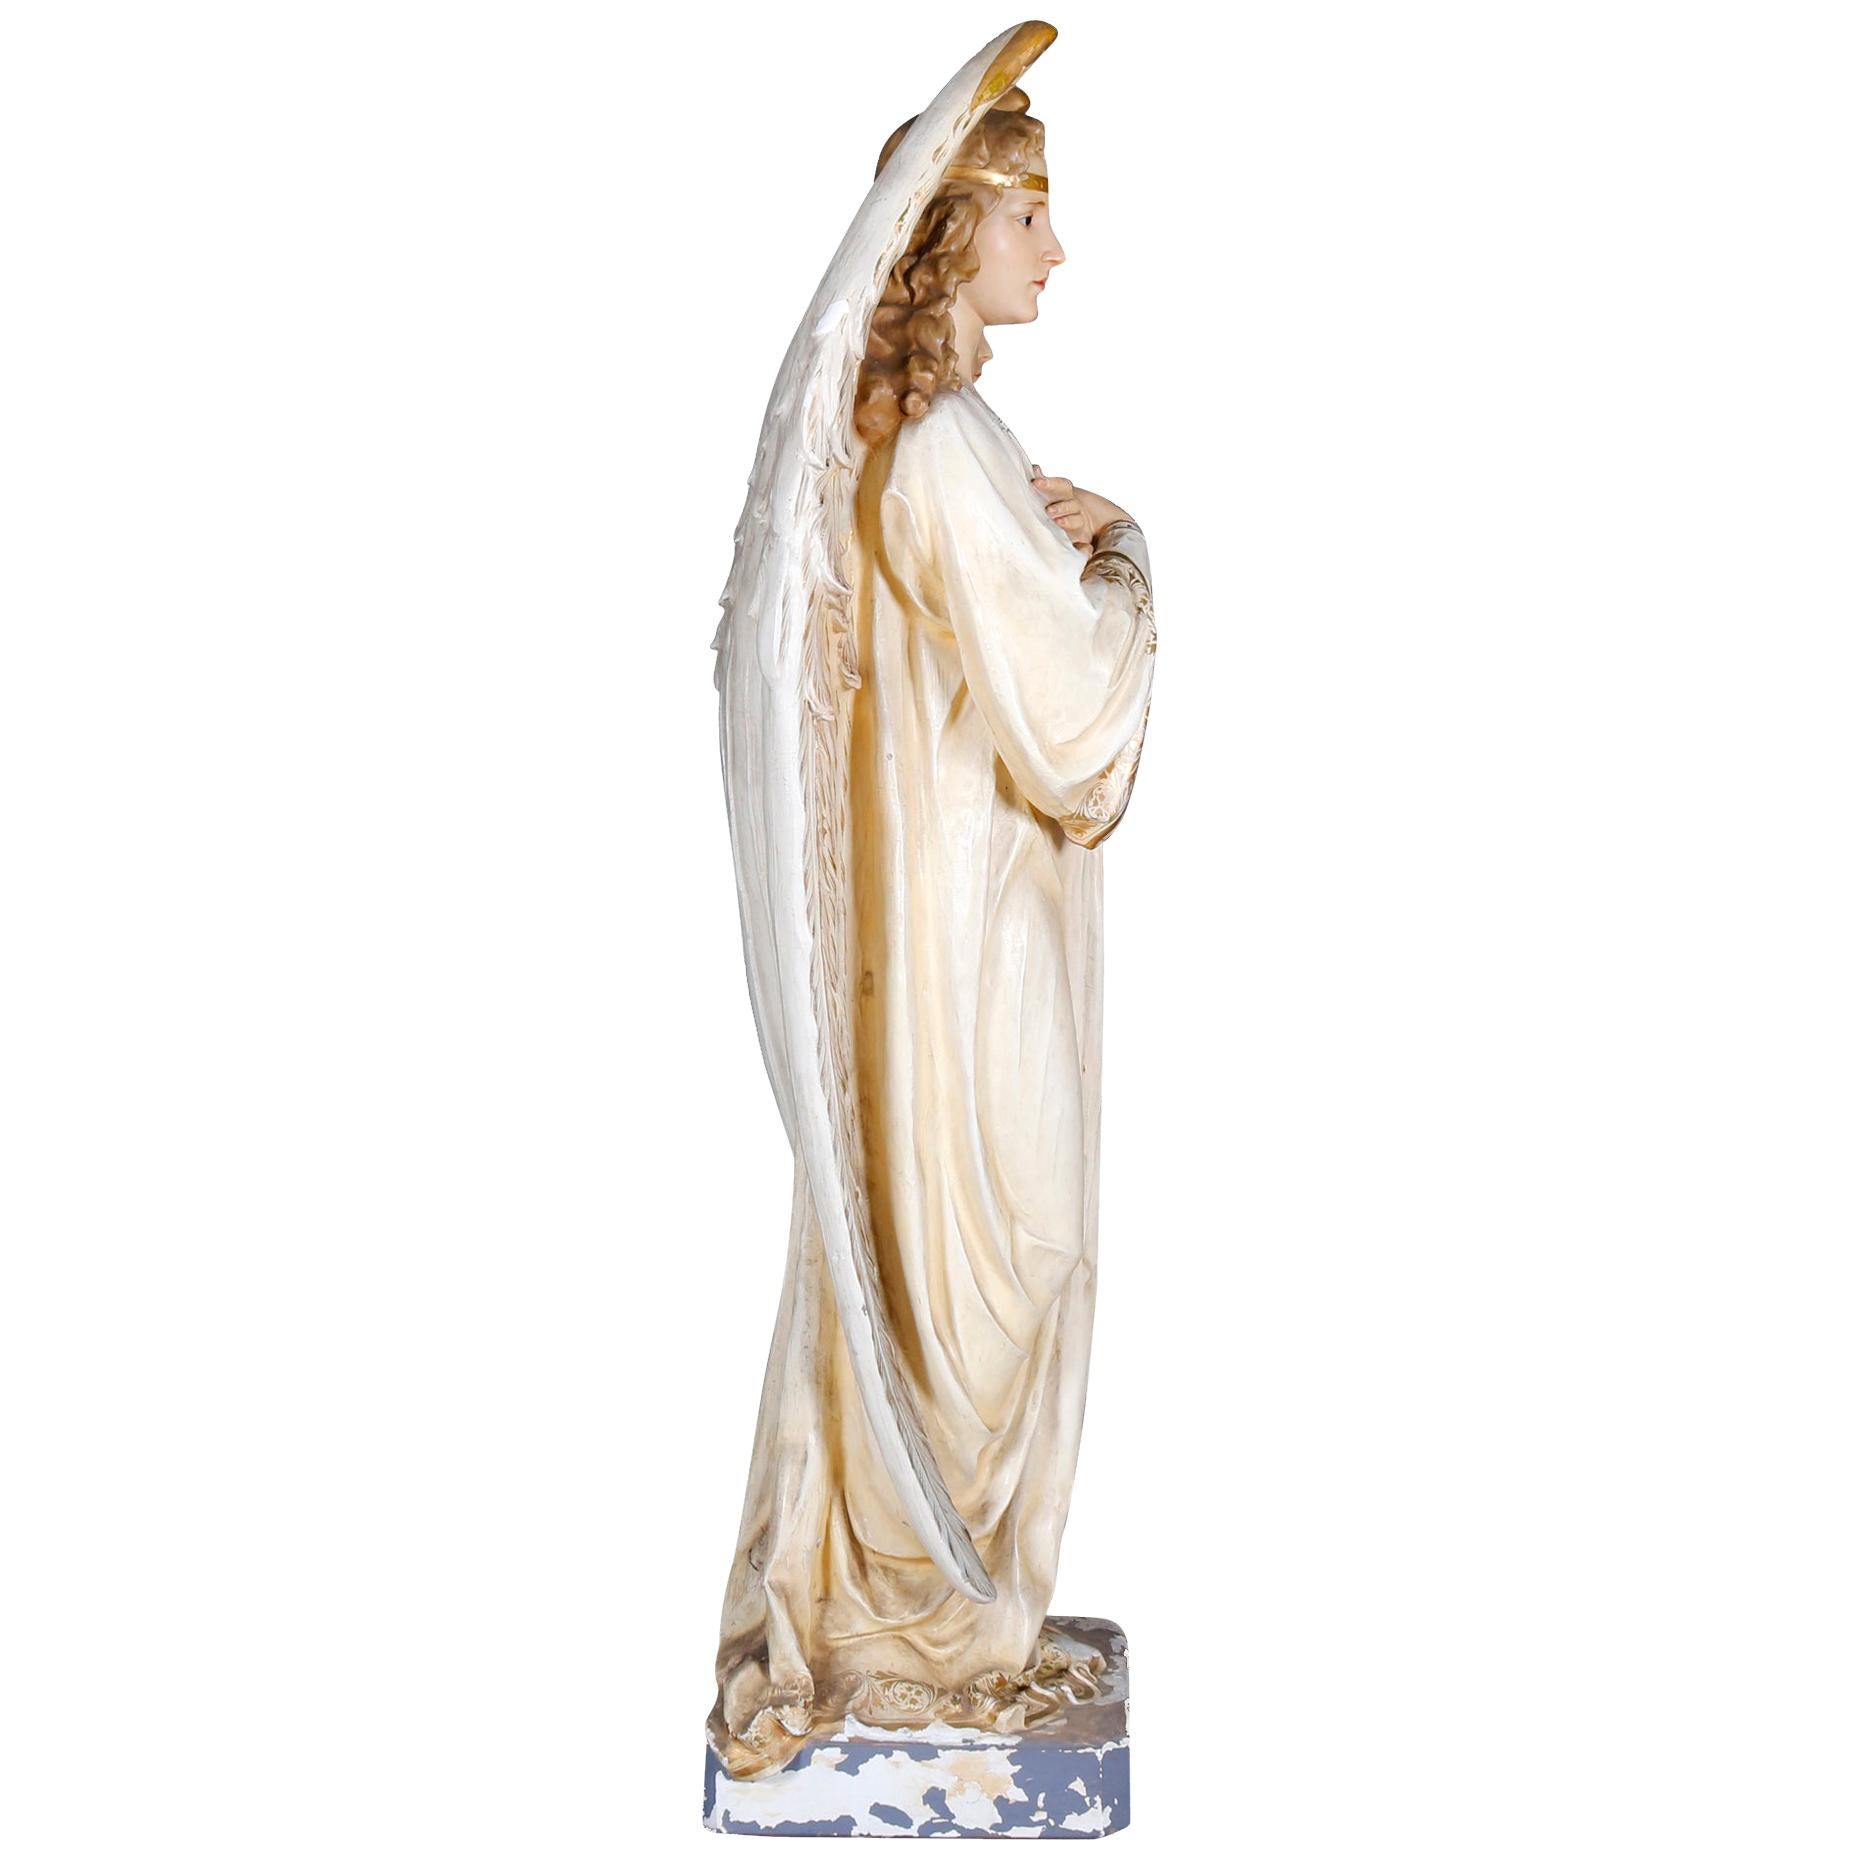 Painted Life Size Polychrome Cast Plaster Angel Statues by Daprato